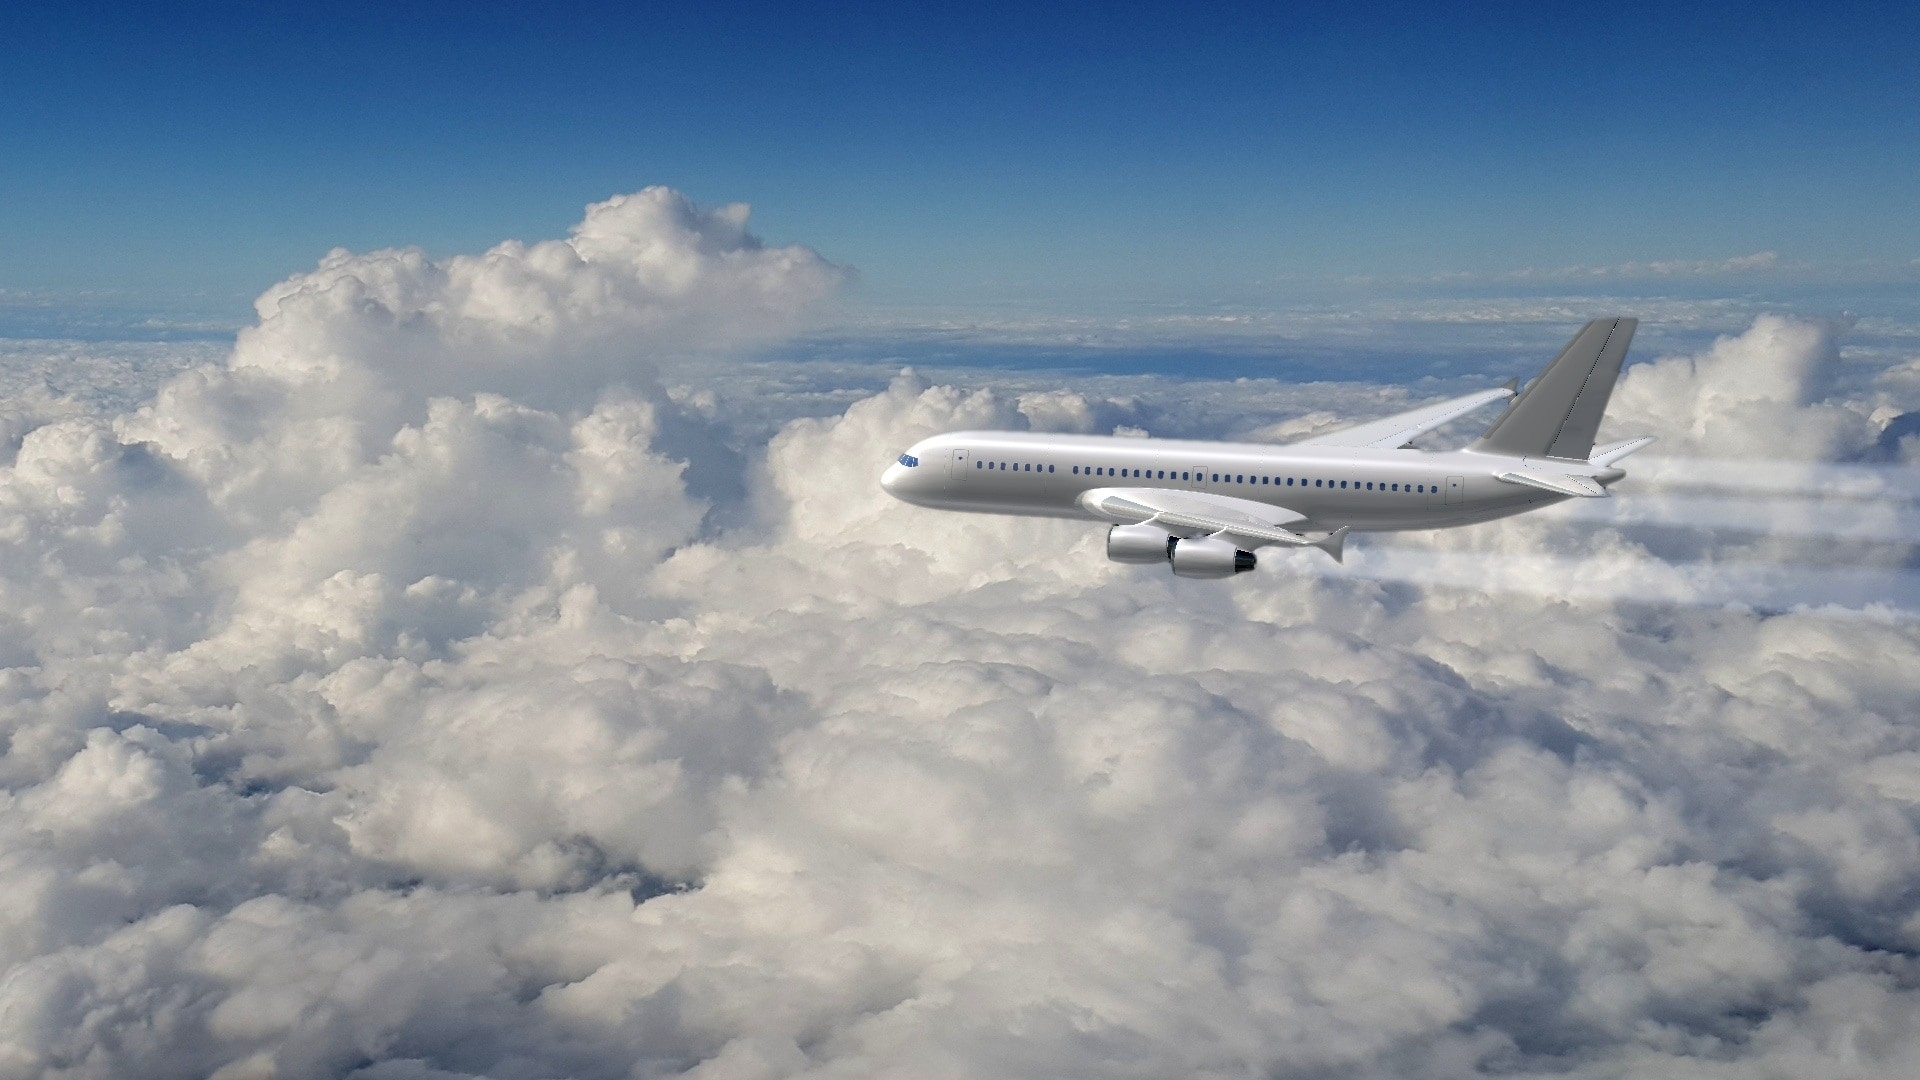 Aircraft: Plane, A machine capable of flying by means of aerodynamic forces. 1920x1080 Full HD Wallpaper.